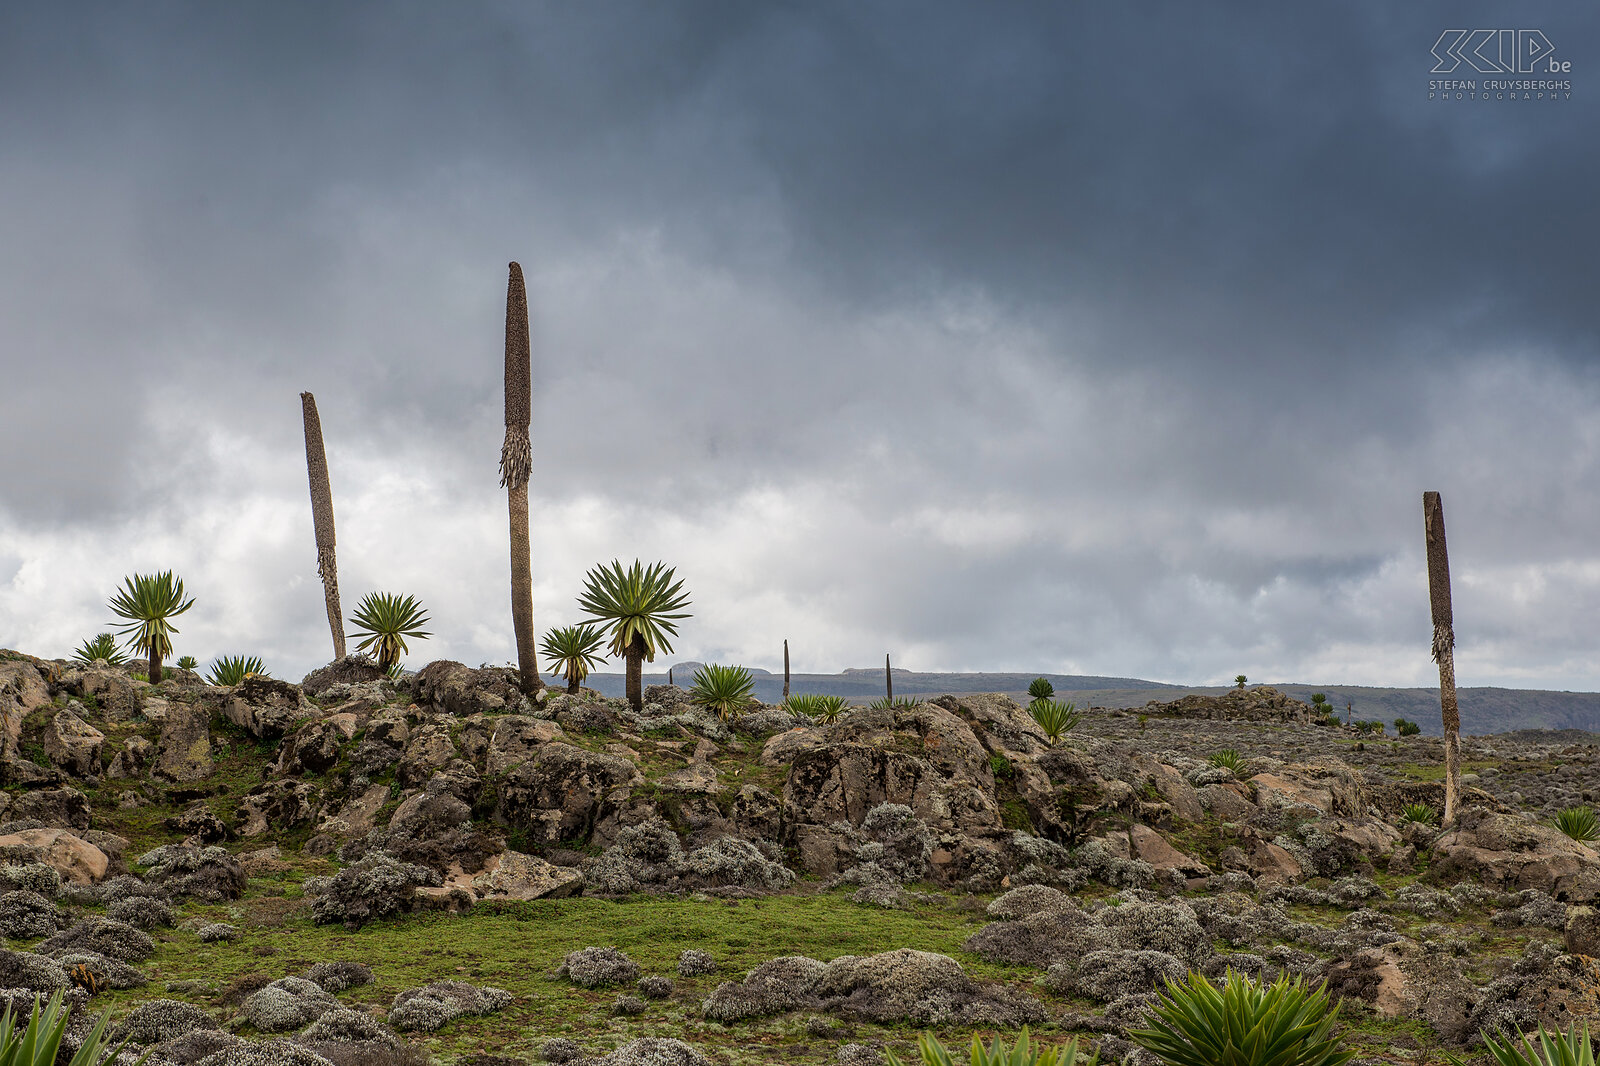 Bale Mountains - Sanetti - Giant lobelia Trees and plants have adapted to the special cold and wet climate on the Sanetti Plateau. Most plants have become smaller, but the impressive giant lobelia (Lobelia rhynchopetalum) can grow up to five meters high. Stefan Cruysberghs